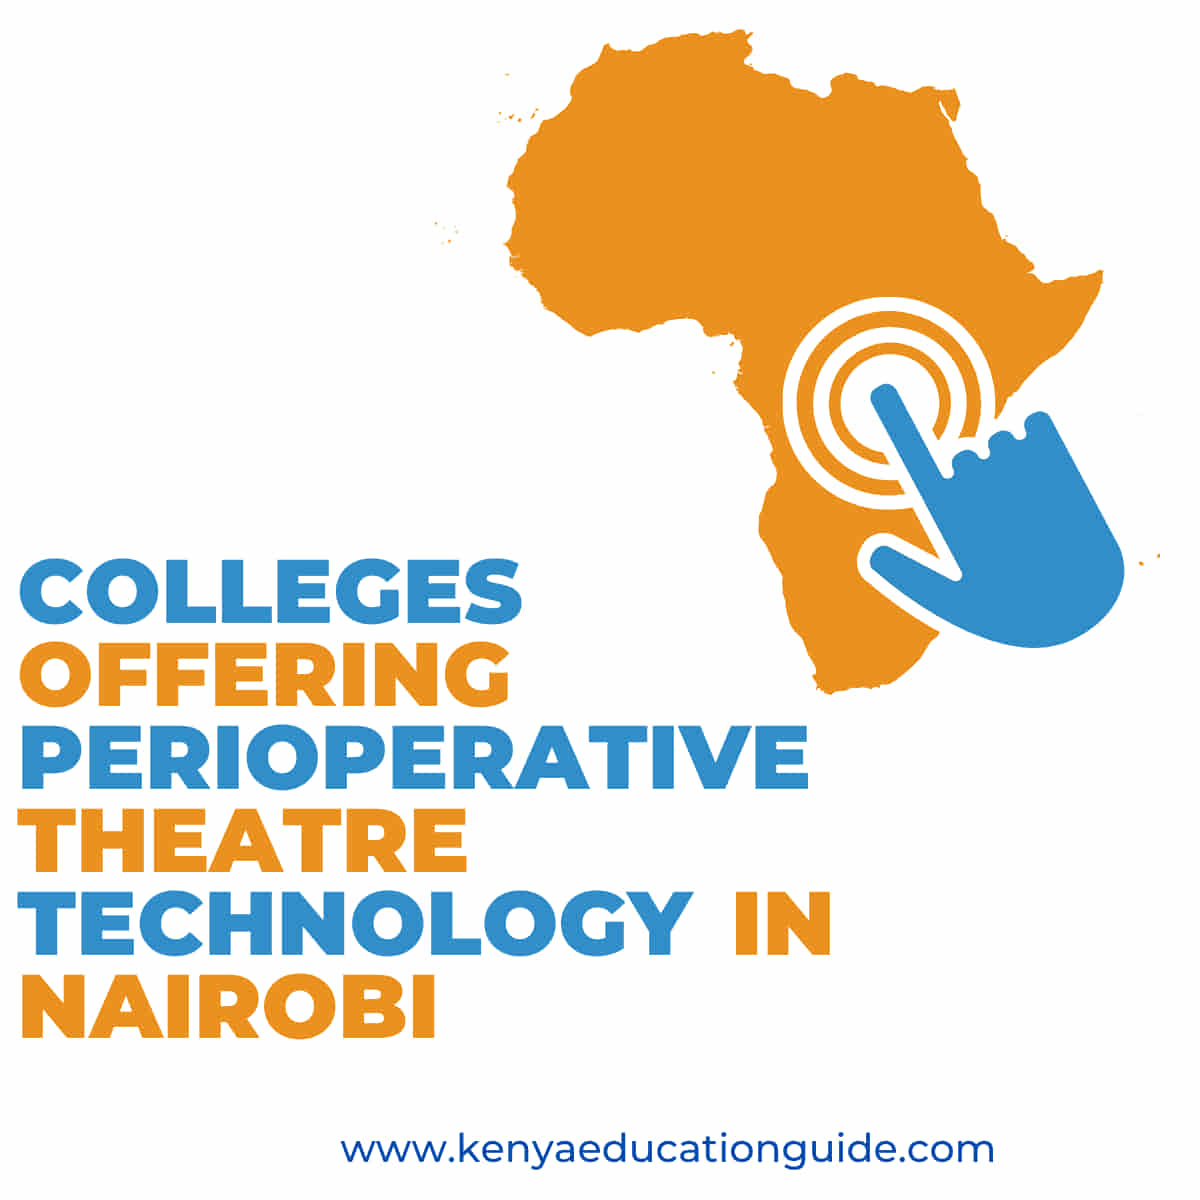 Colleges offering perioperative theatre technology in Nairobi